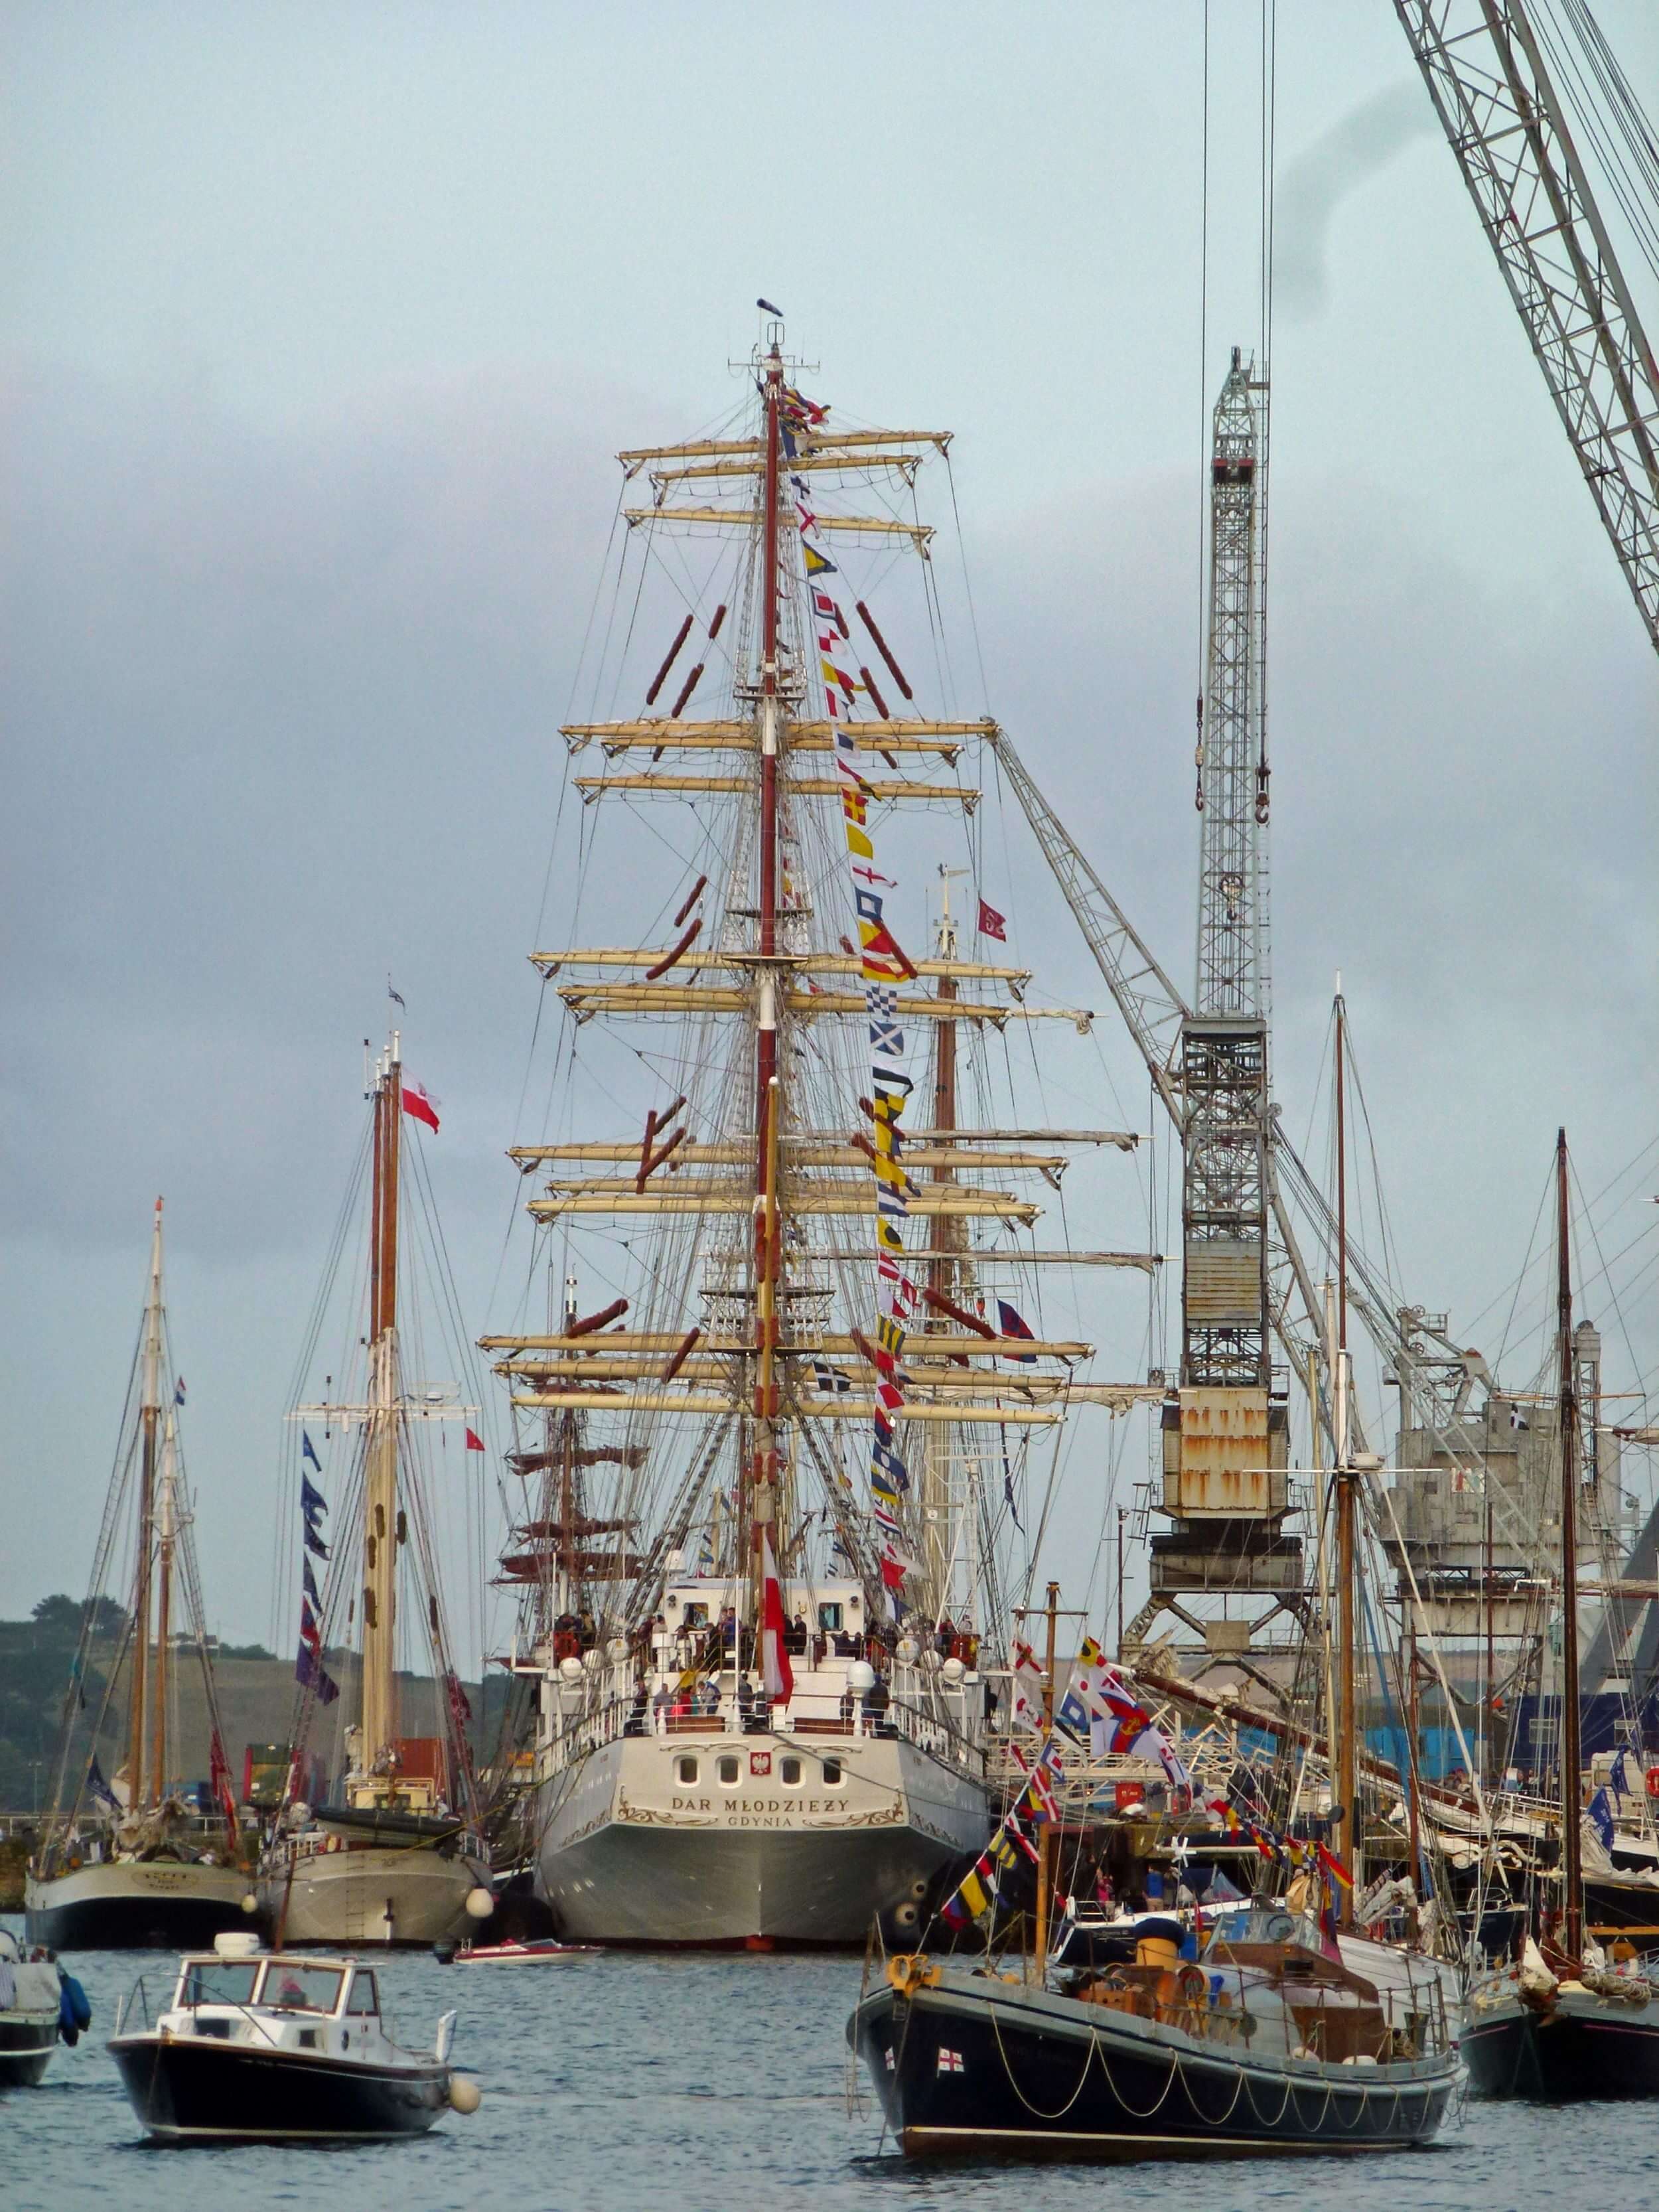 A photo of the Polish Tall Ship Dar Mlodziezyat A&P Falmouth in 2014. Taken during the regatta, the ship is surrounded by a variety of boats, including other tall ships, a historic lifeboat, and small sailing vessels. It is an overcast day.